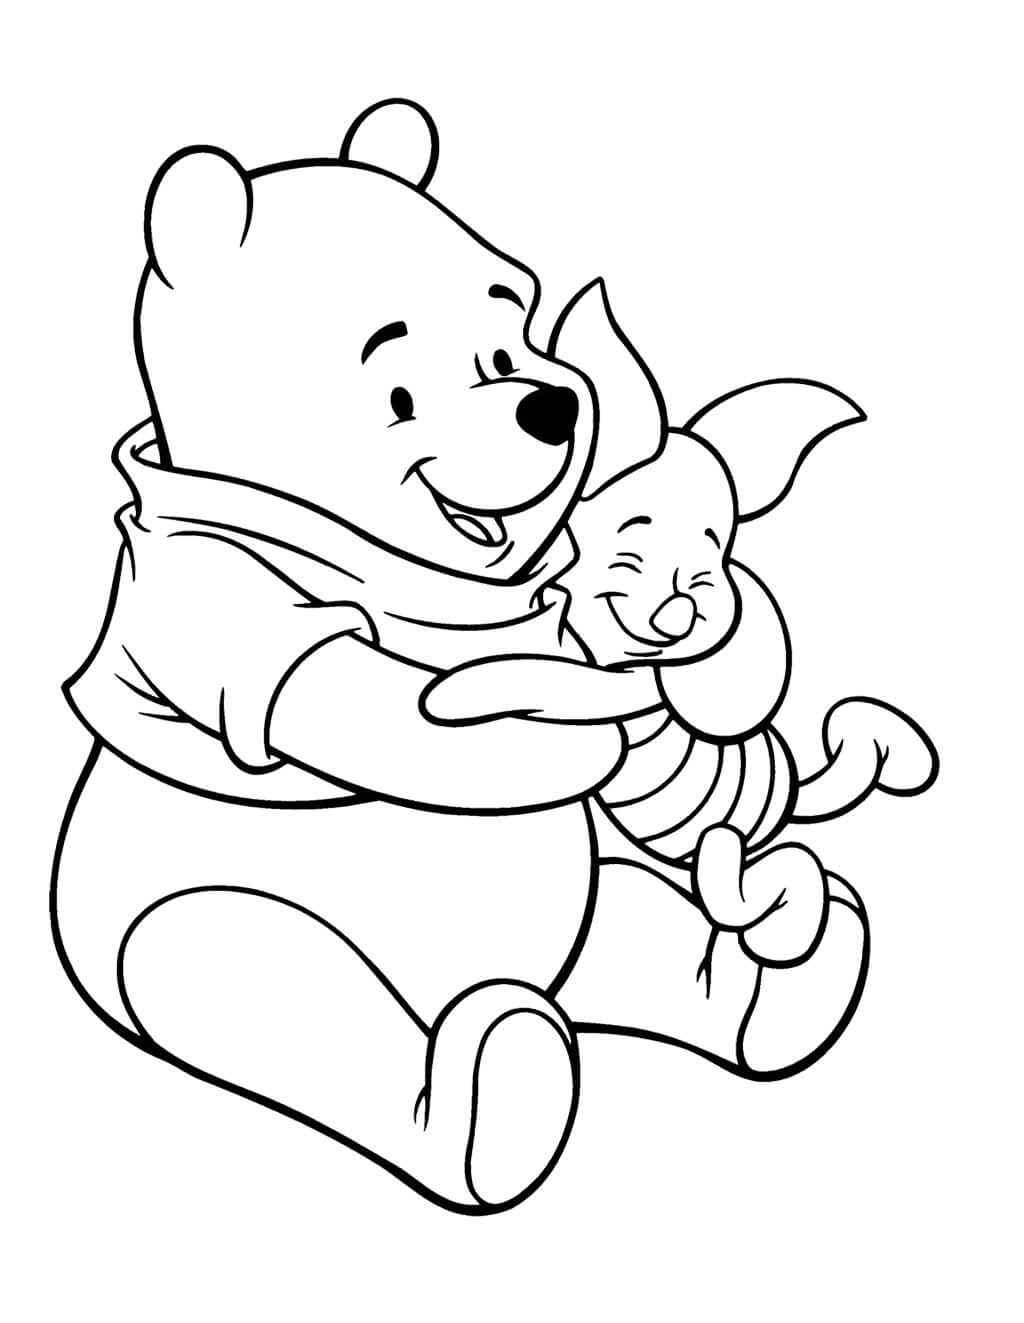 Pooh And Piglet Are Friends Coloring Page